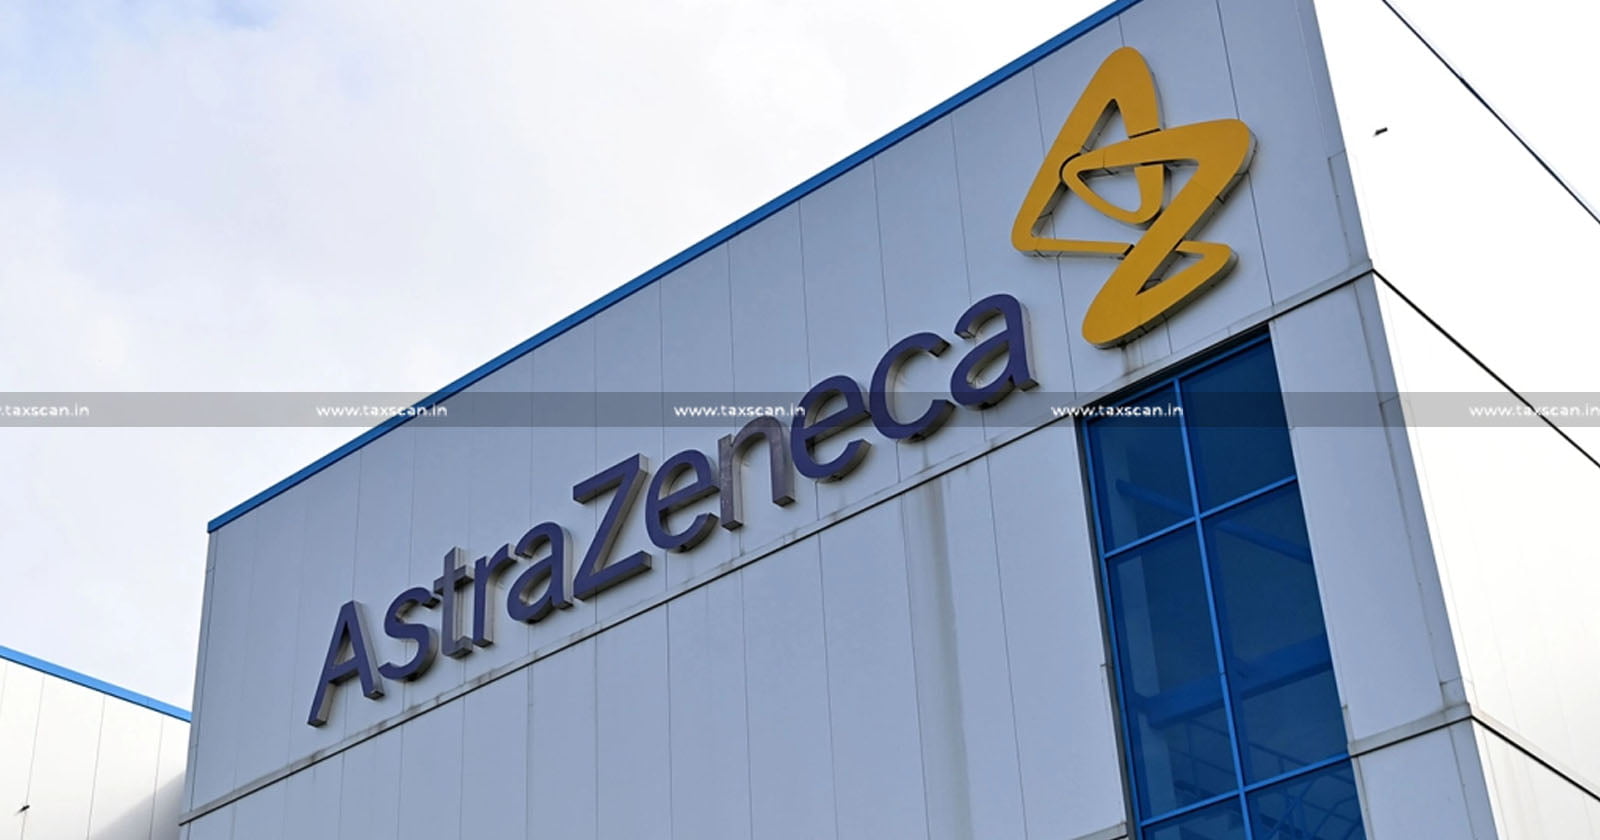 Astra Zeneca - Relief to Astra Zeneca - ITAT - Relief to Astra Zeneca - Disallowance - Disallowance of Contribution - Gratuity Funds - Funds - Income Tax - Income Tax Act - taxscan